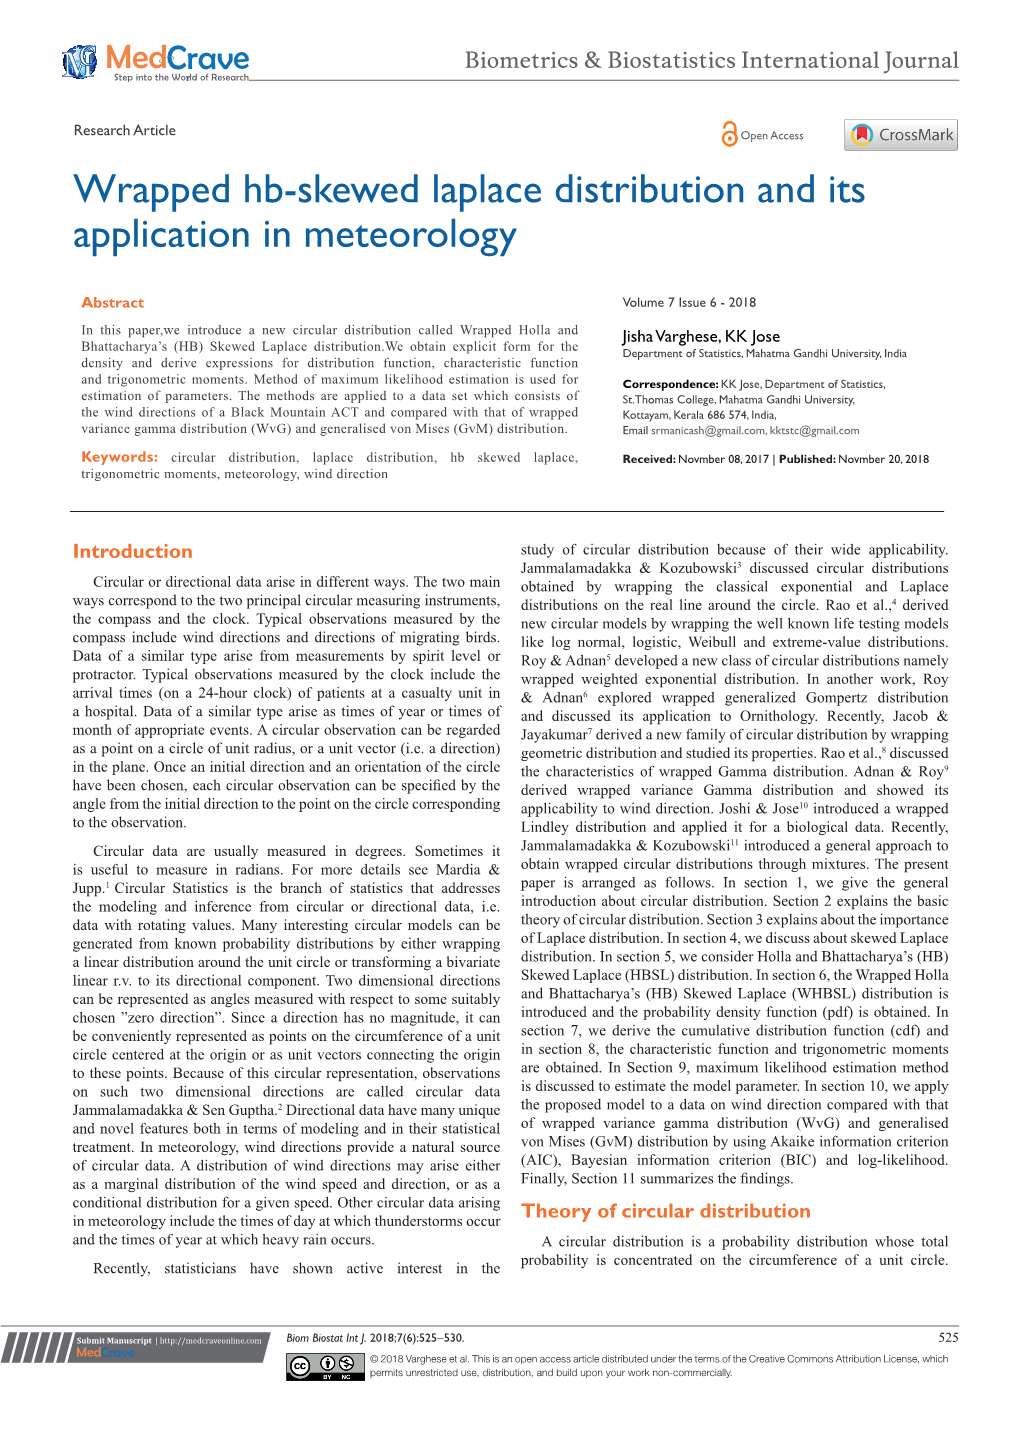 Wrapped Hb-Skewed Laplace Distribution and Its Application in Meteorology